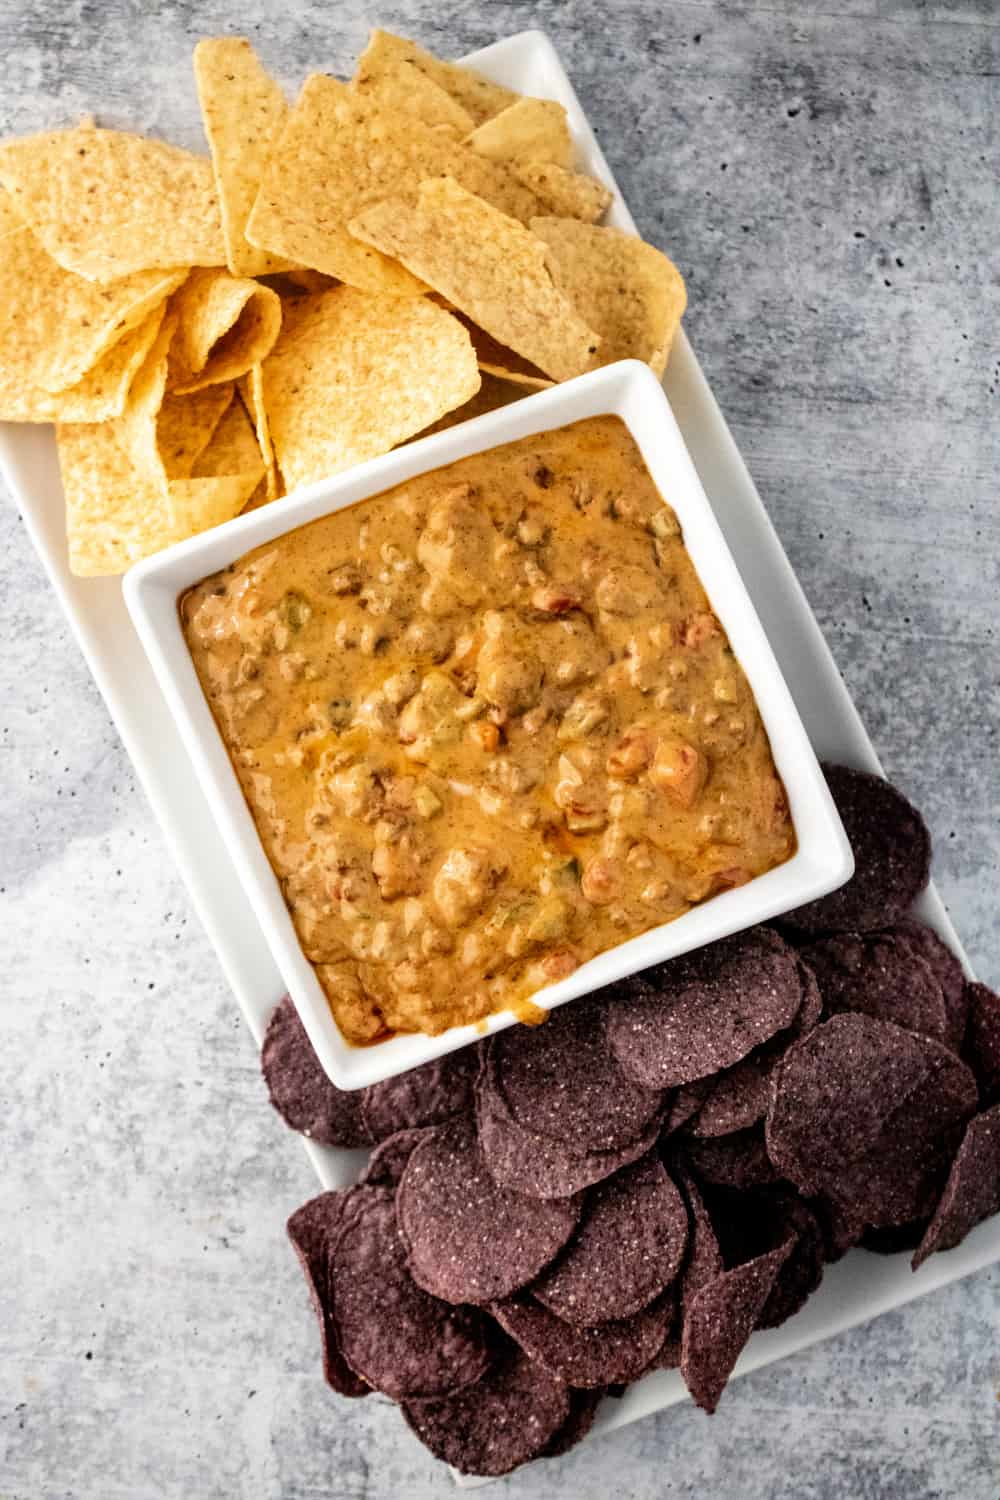 Beef Queso Dip combines a beef mixture with melted cheese and spices. For perfect party food, you need this delicious cheesy appetizer. via @jugglingactmama